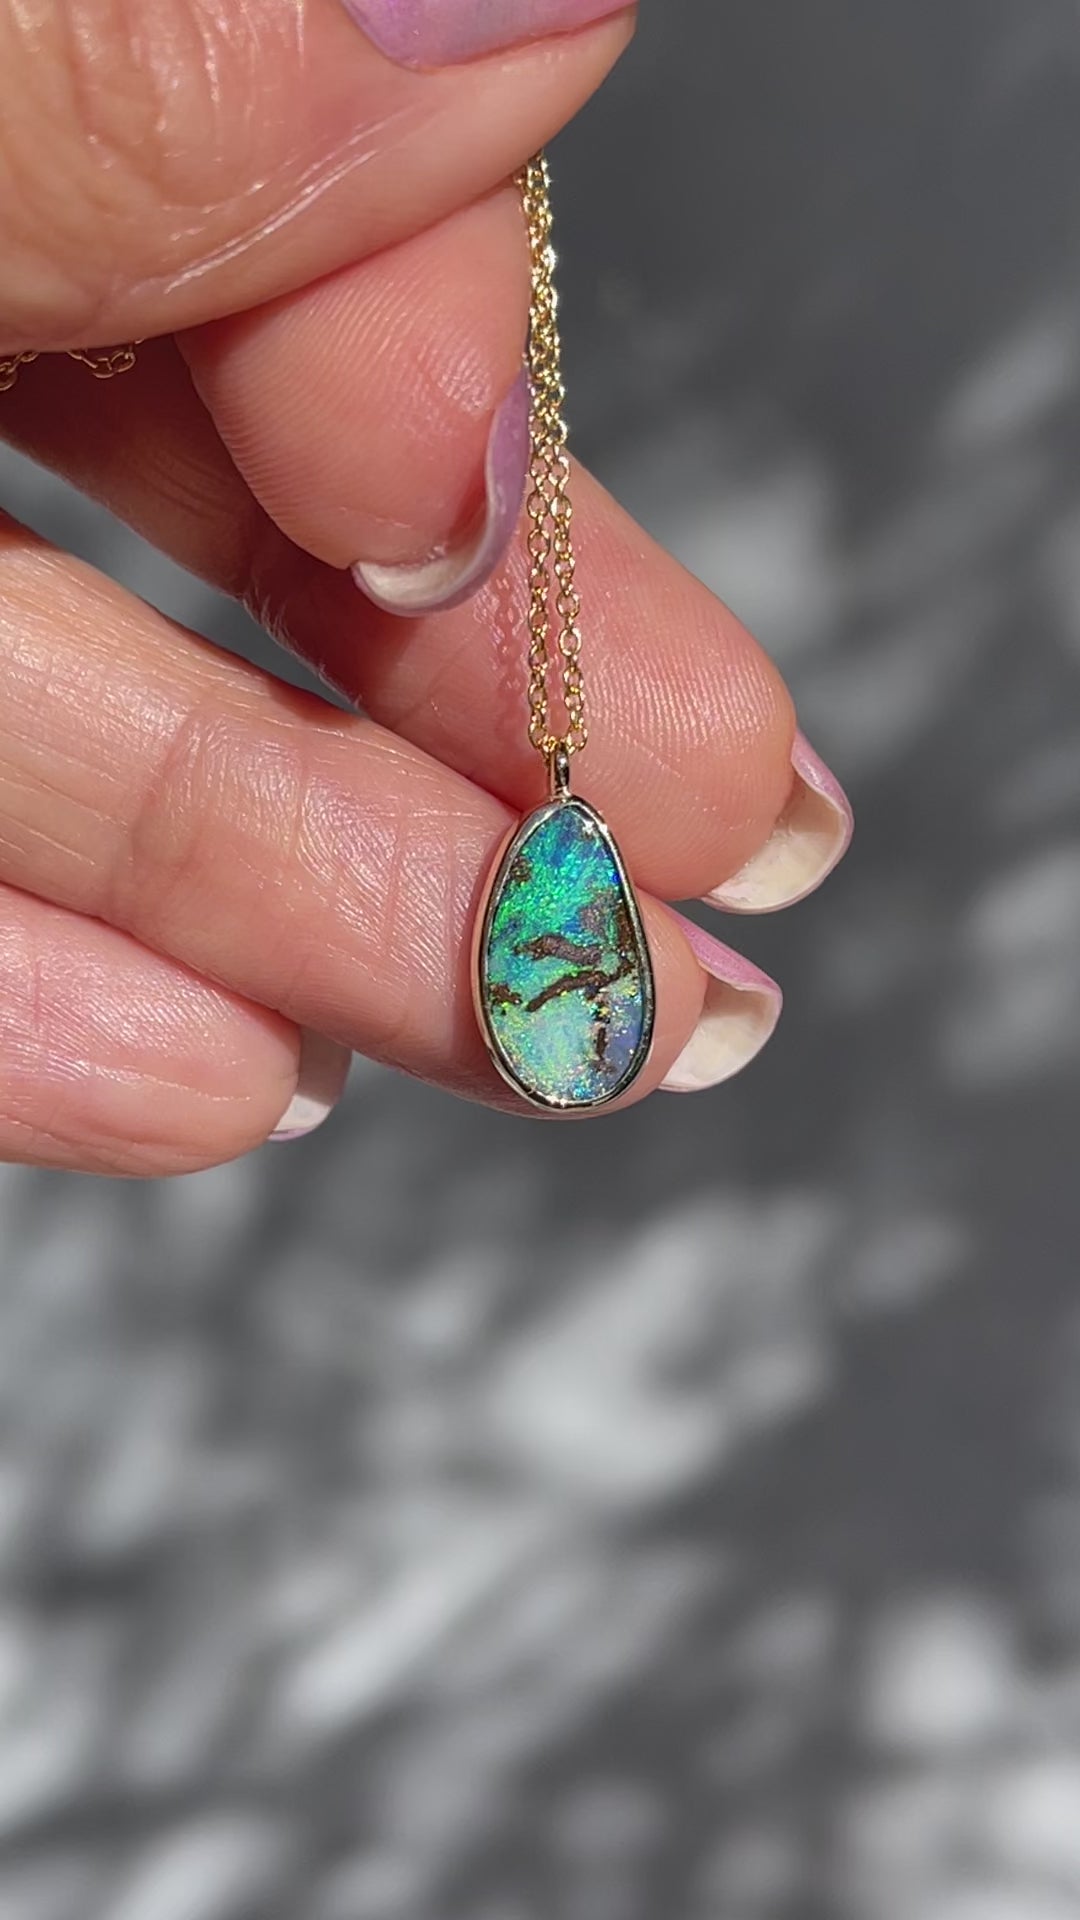 Video of an Australian Opal Necklace by NIXIN Jewelry held in the sunlight to show its colors. The opal is blue and green, set in 14k gold and hangs from a link chain.